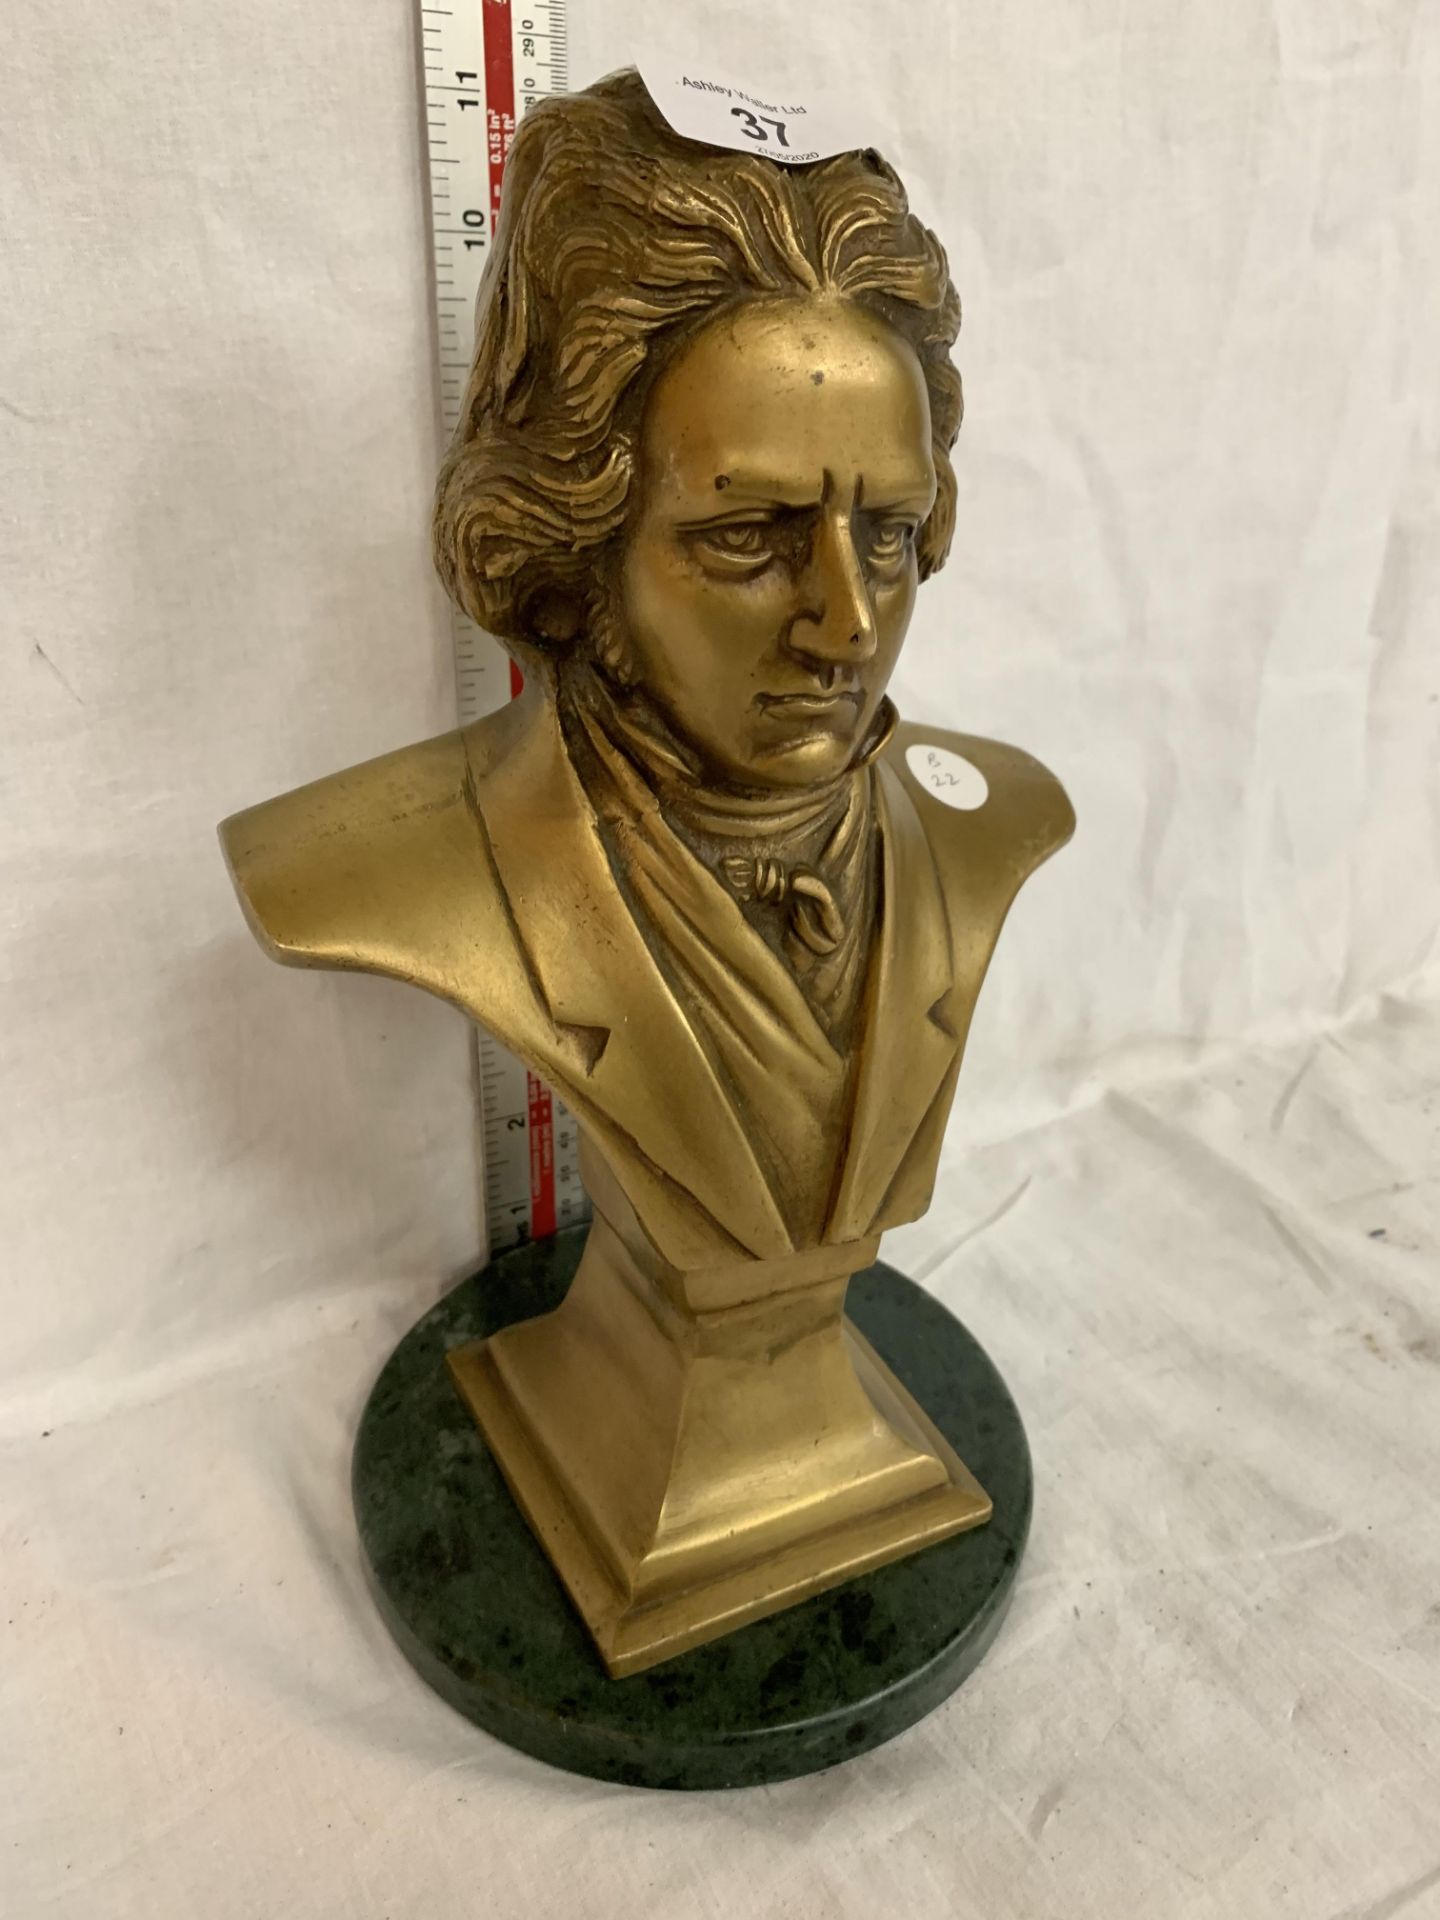 A BUST OF BEETHOVEN ON A MARBLE BASE - Image 2 of 4